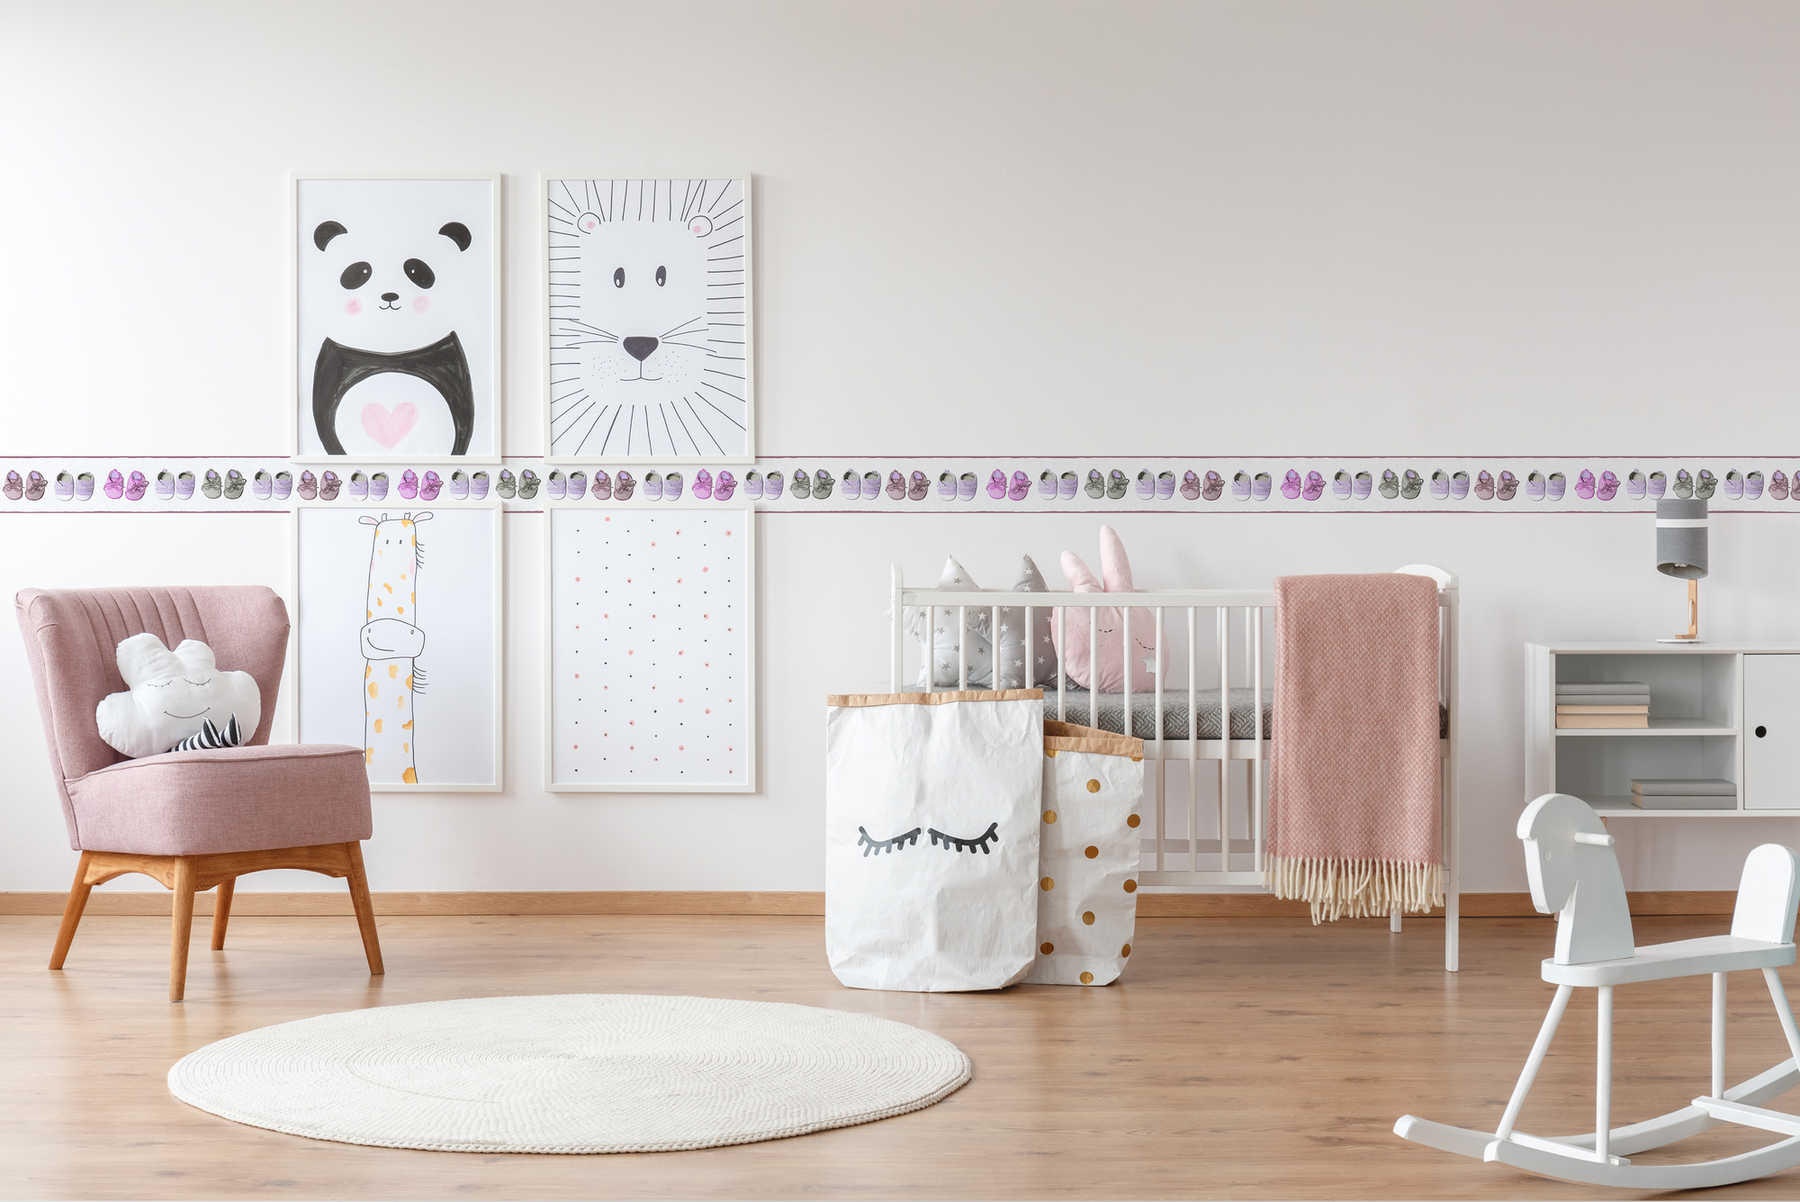             Baby room border for girls - pink
        